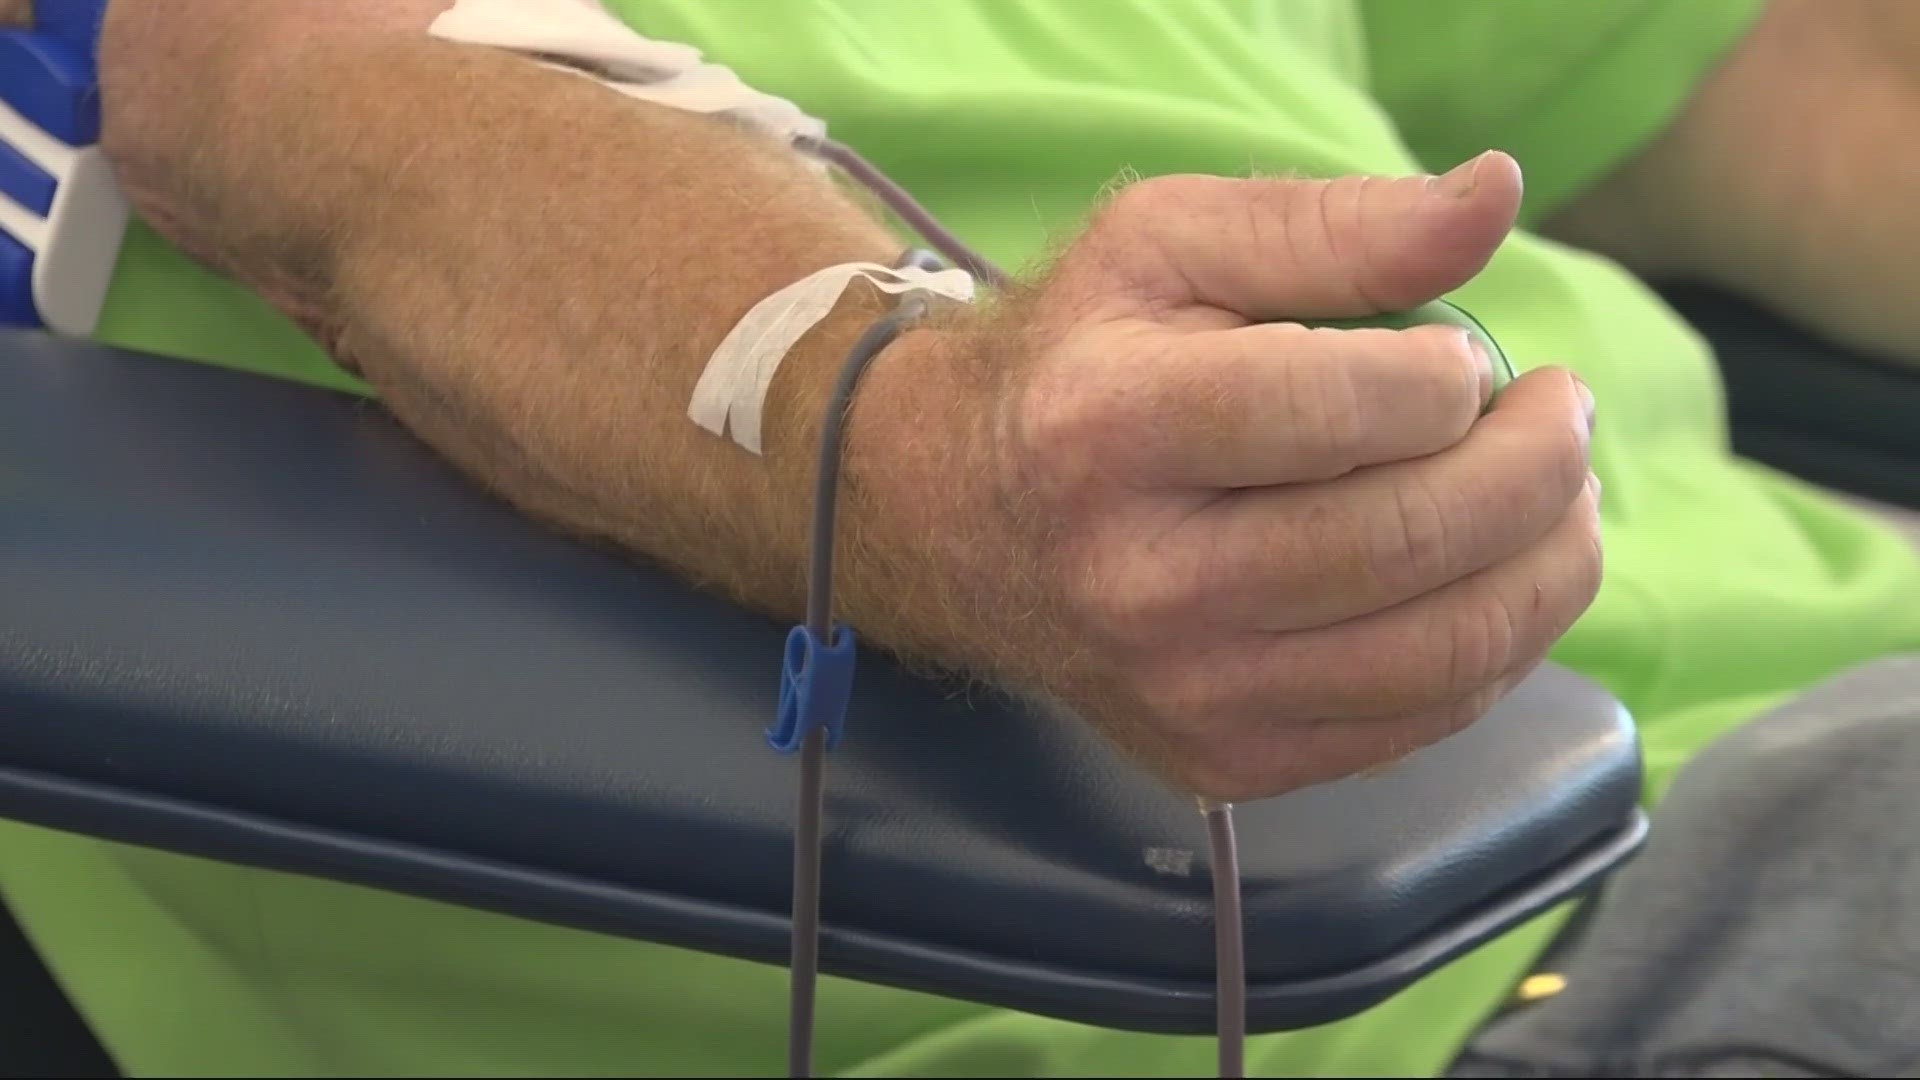 Officials with blood donation centers say donations are needed to make sure supplies are adequate in case blood drives are cancelled due to bad weather.